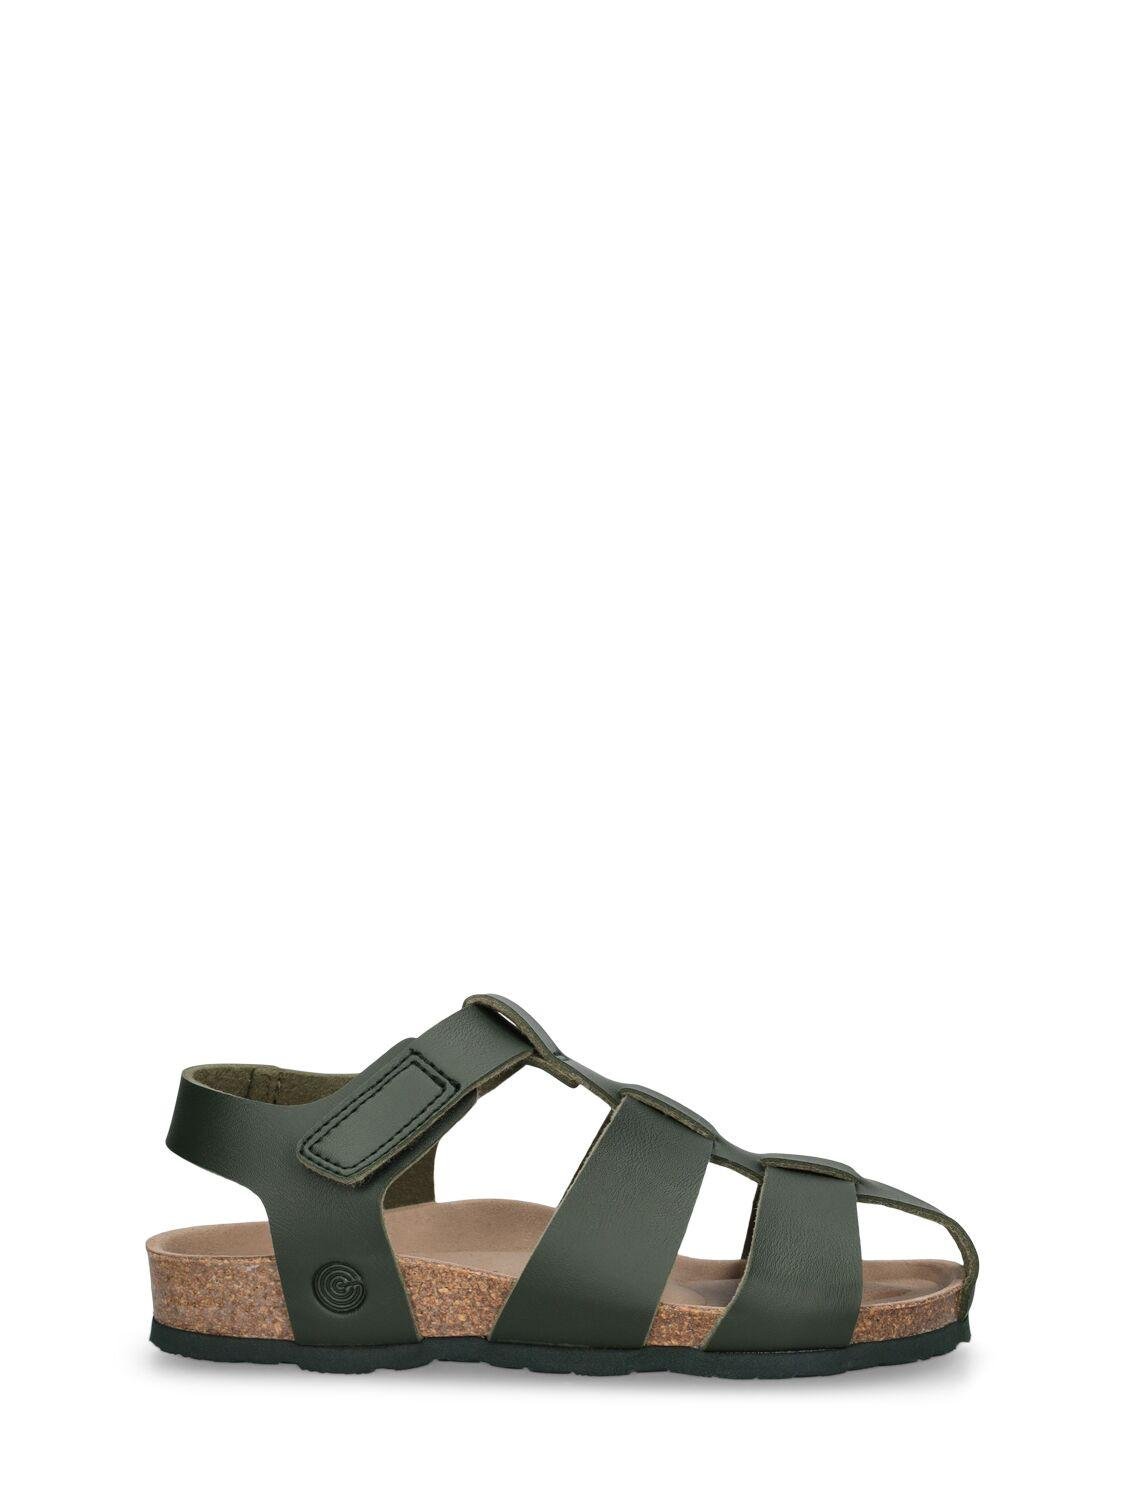 Vegan Faux Leather Sandals by GENUINS